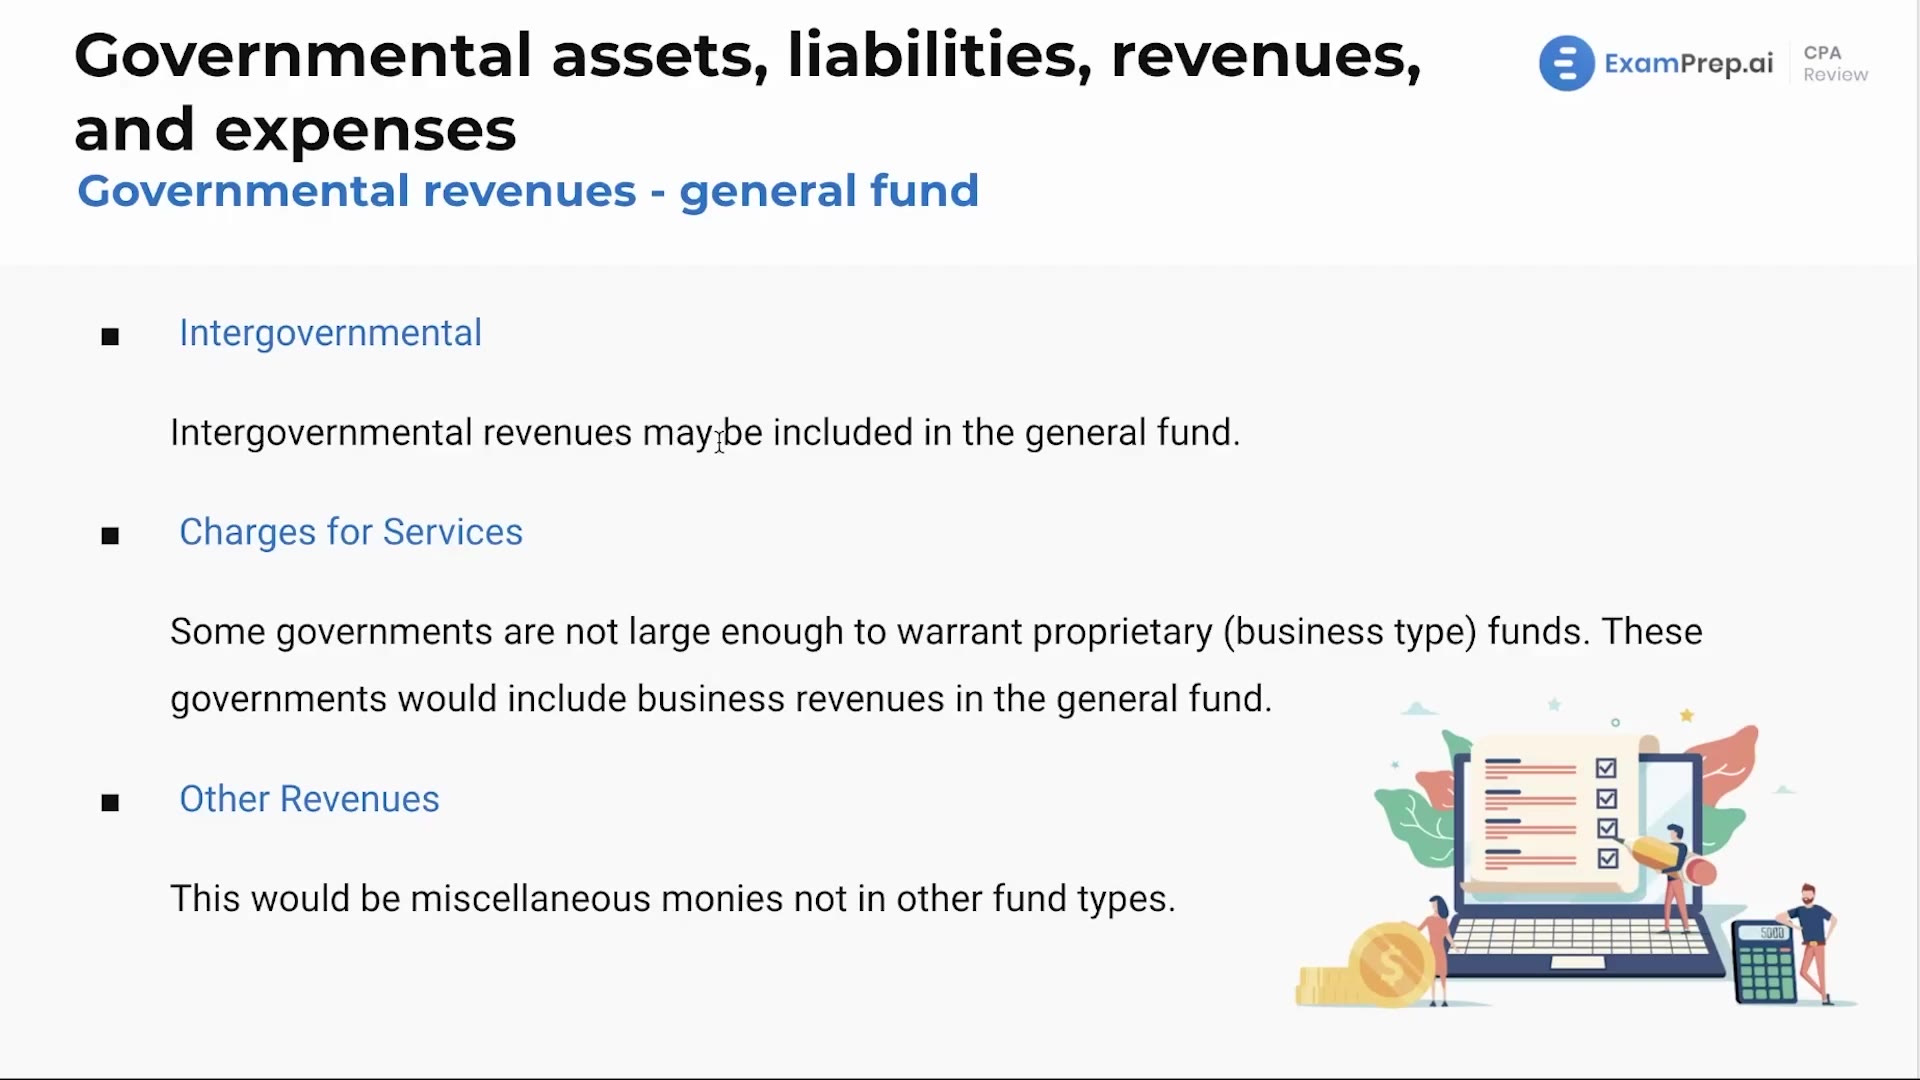 Governmental Revenues - General Fund lesson thumbnail